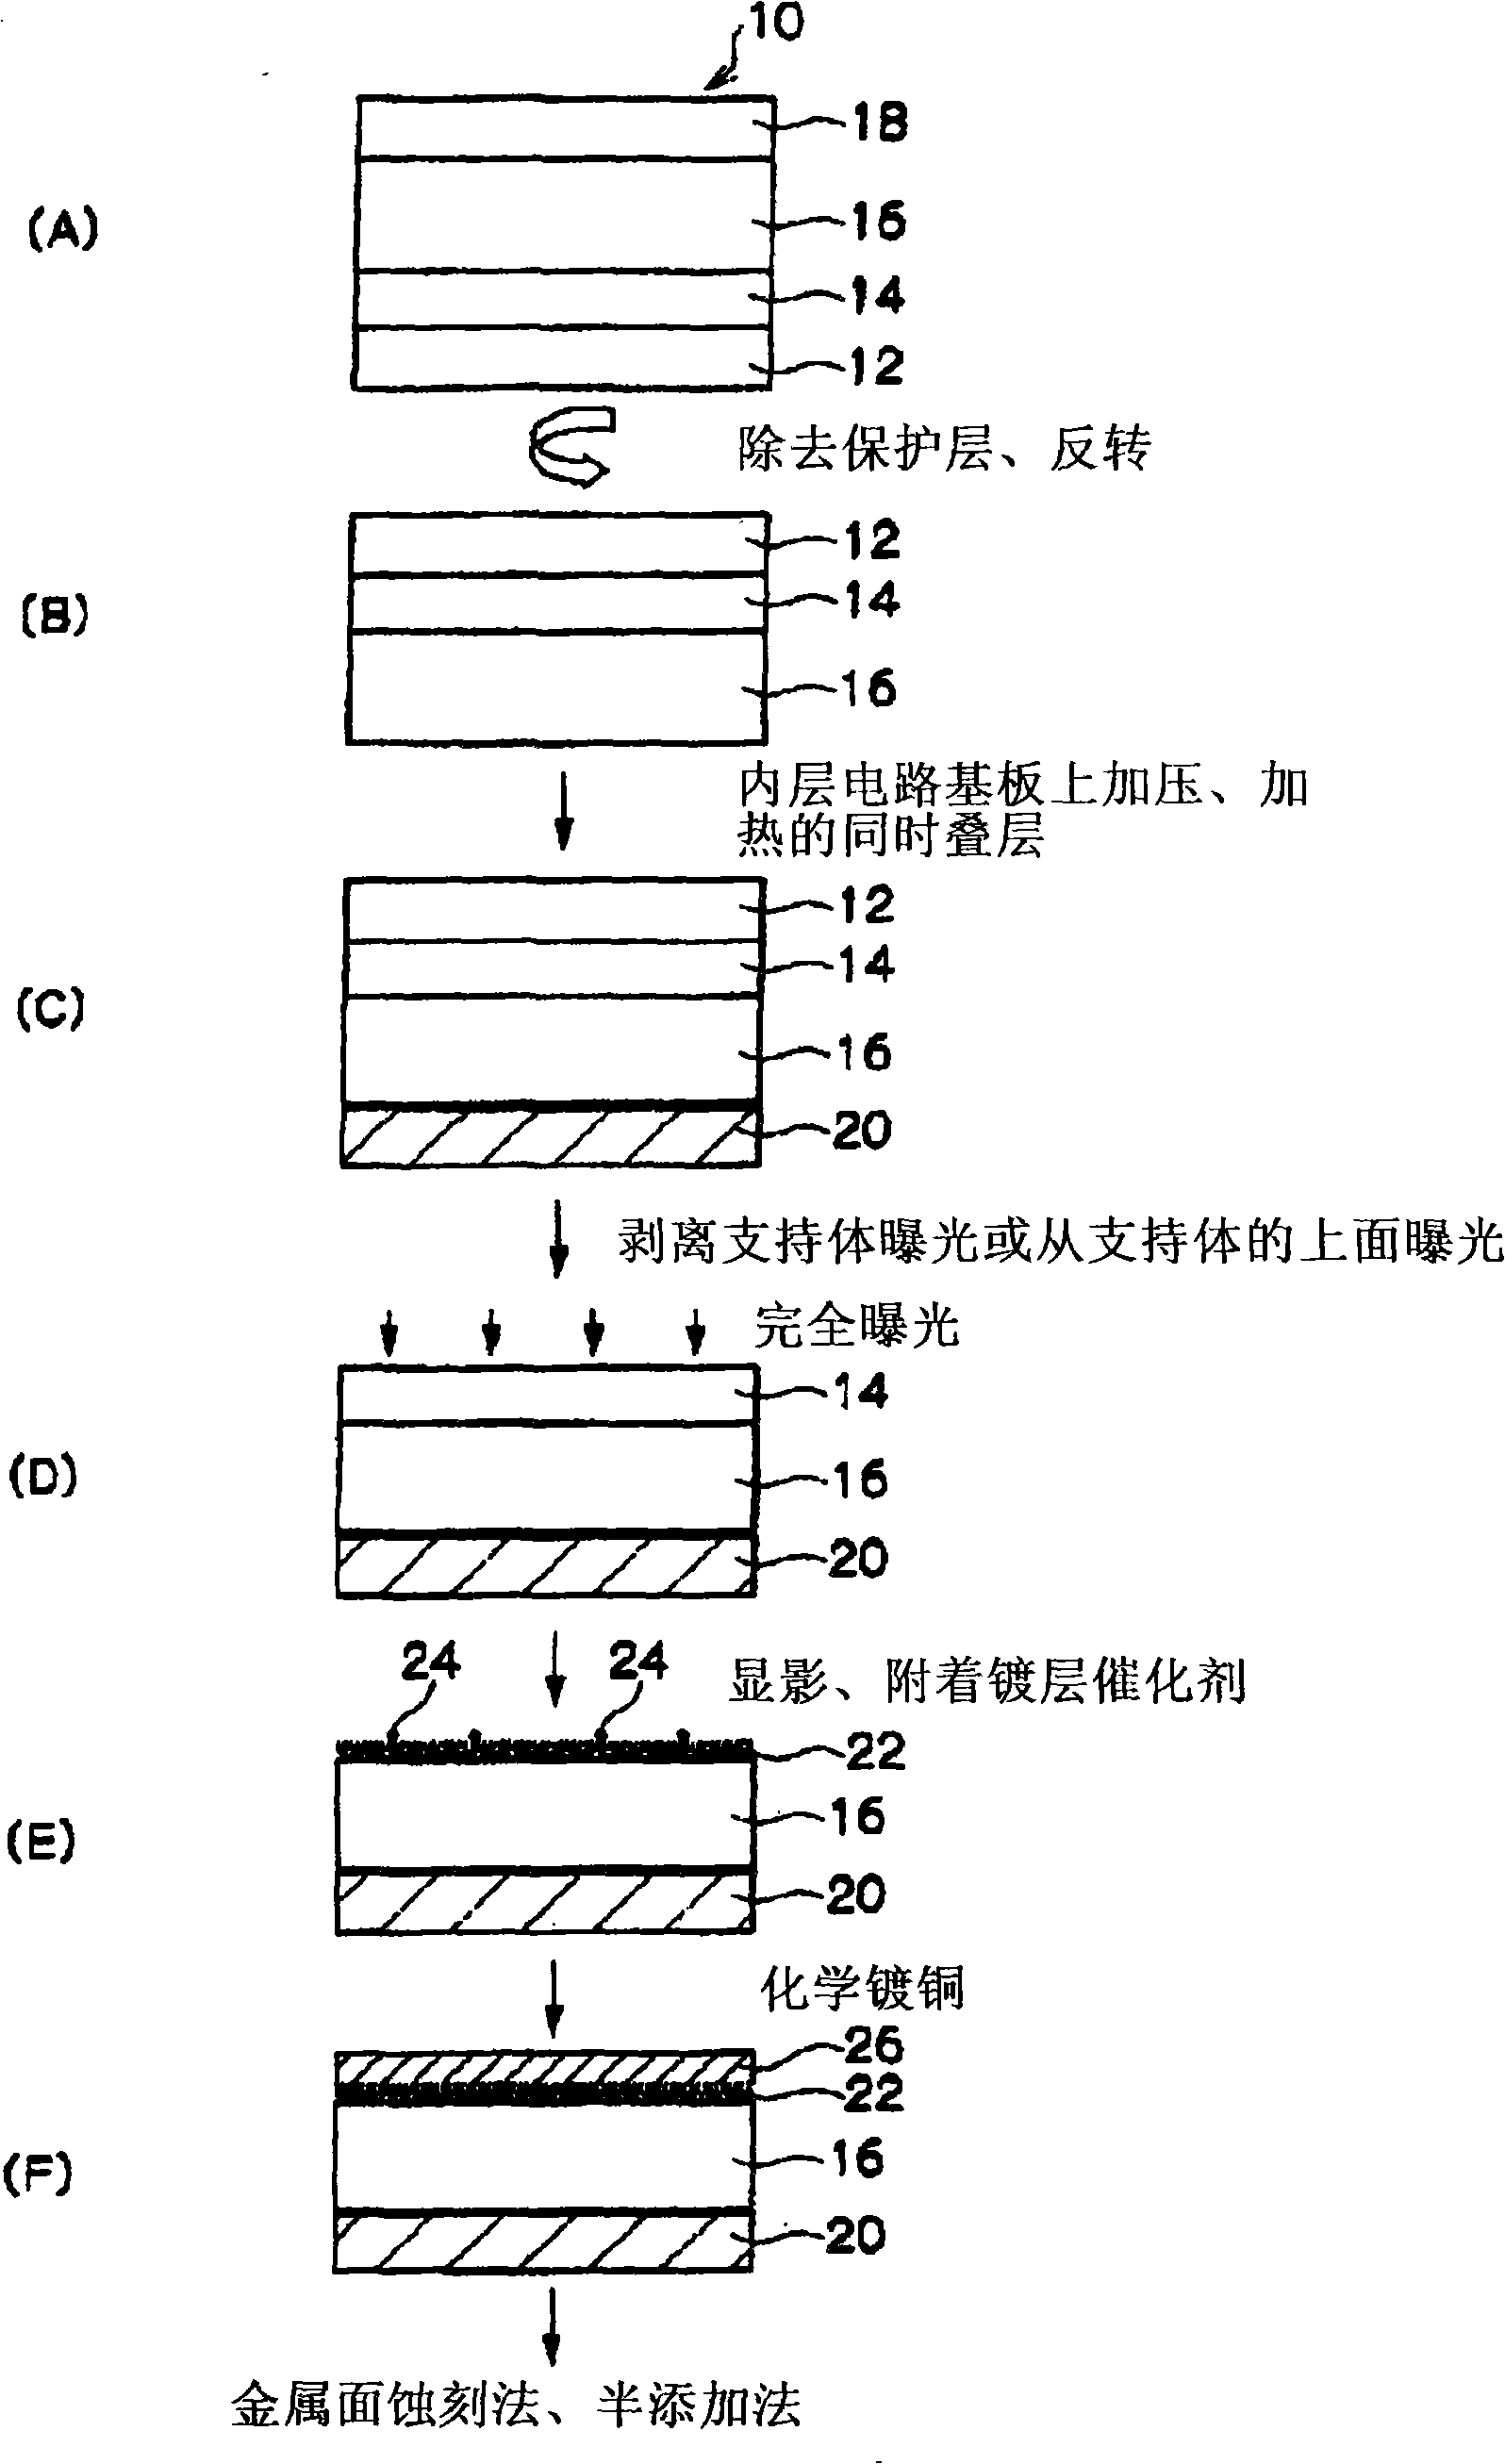 Laminate for printed wiring board, printed wiring board using same, method for manufacturing printed wiring board, electrical component, electronic component, and electrical device